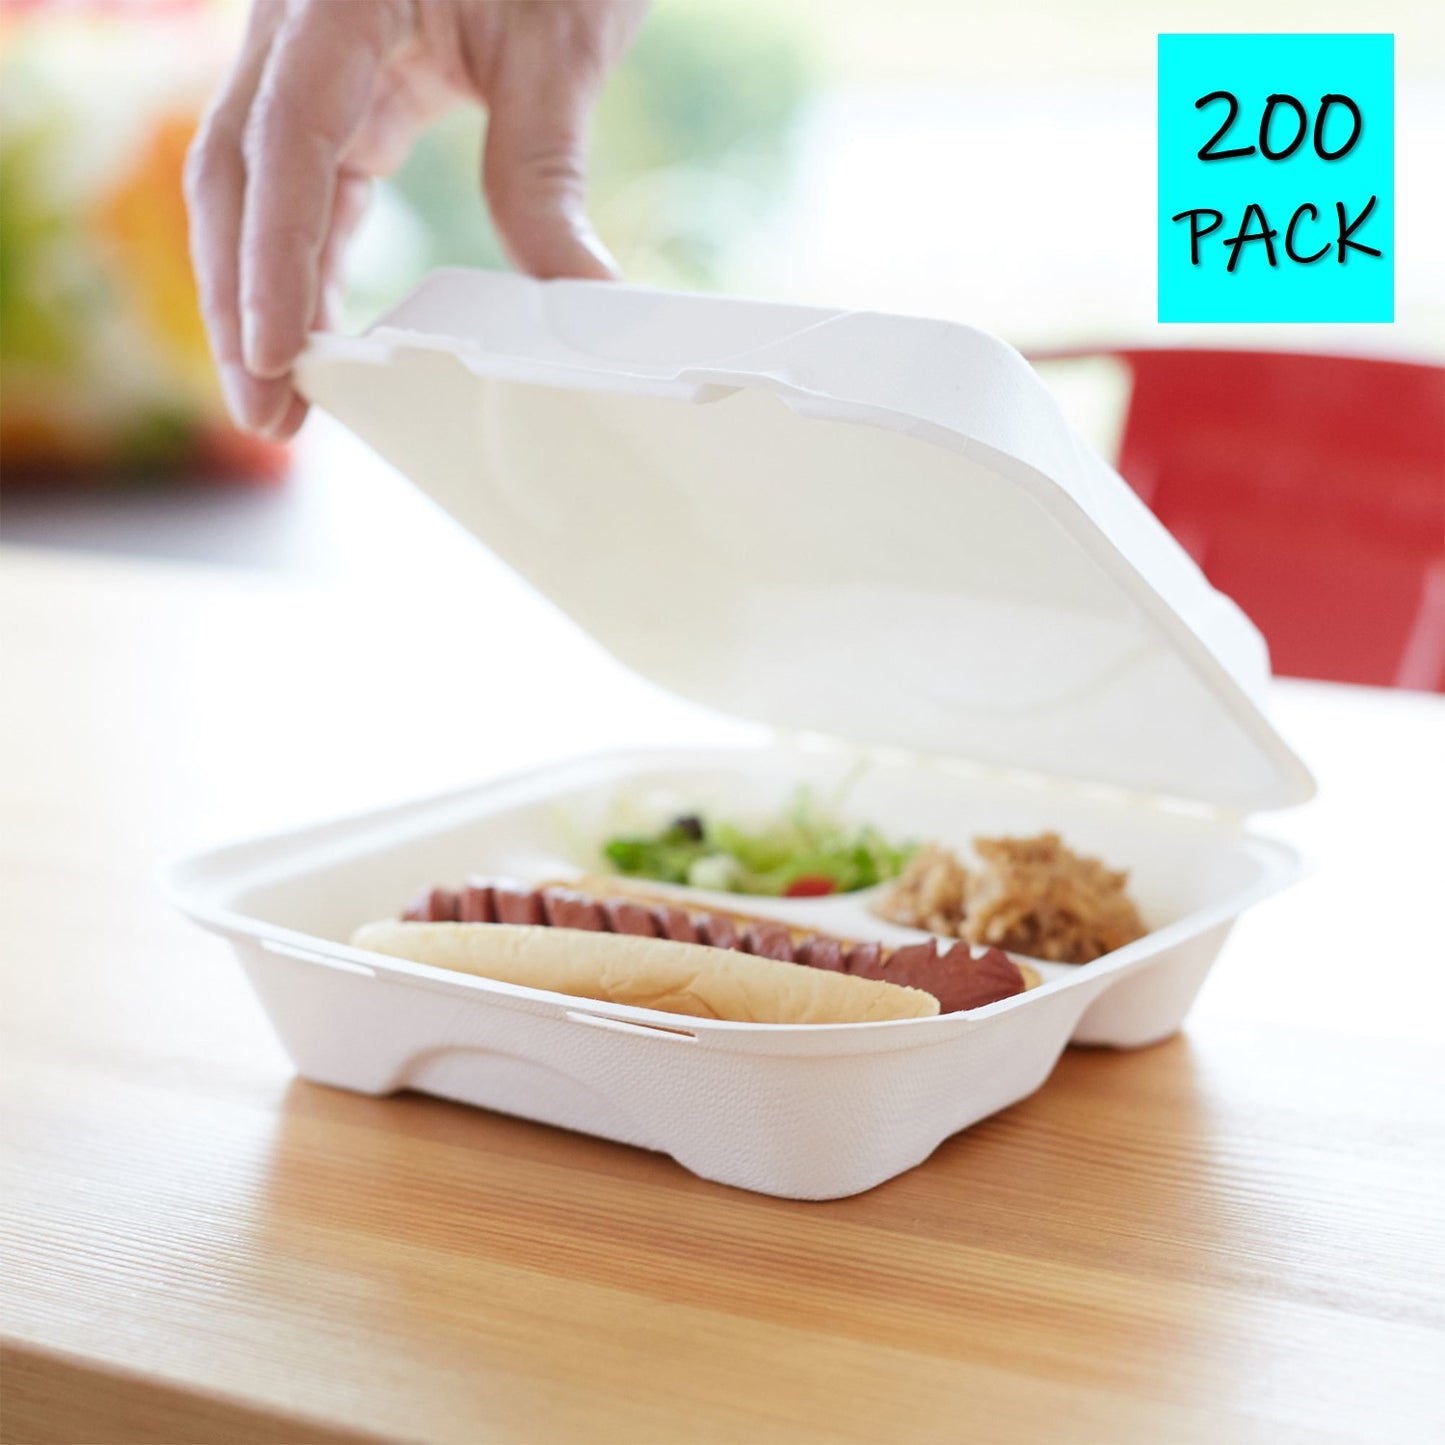 Take Out Clamshell 8" 3 Compartment 8X8X3 Bagasse Biodegradable Eco 200 Pack